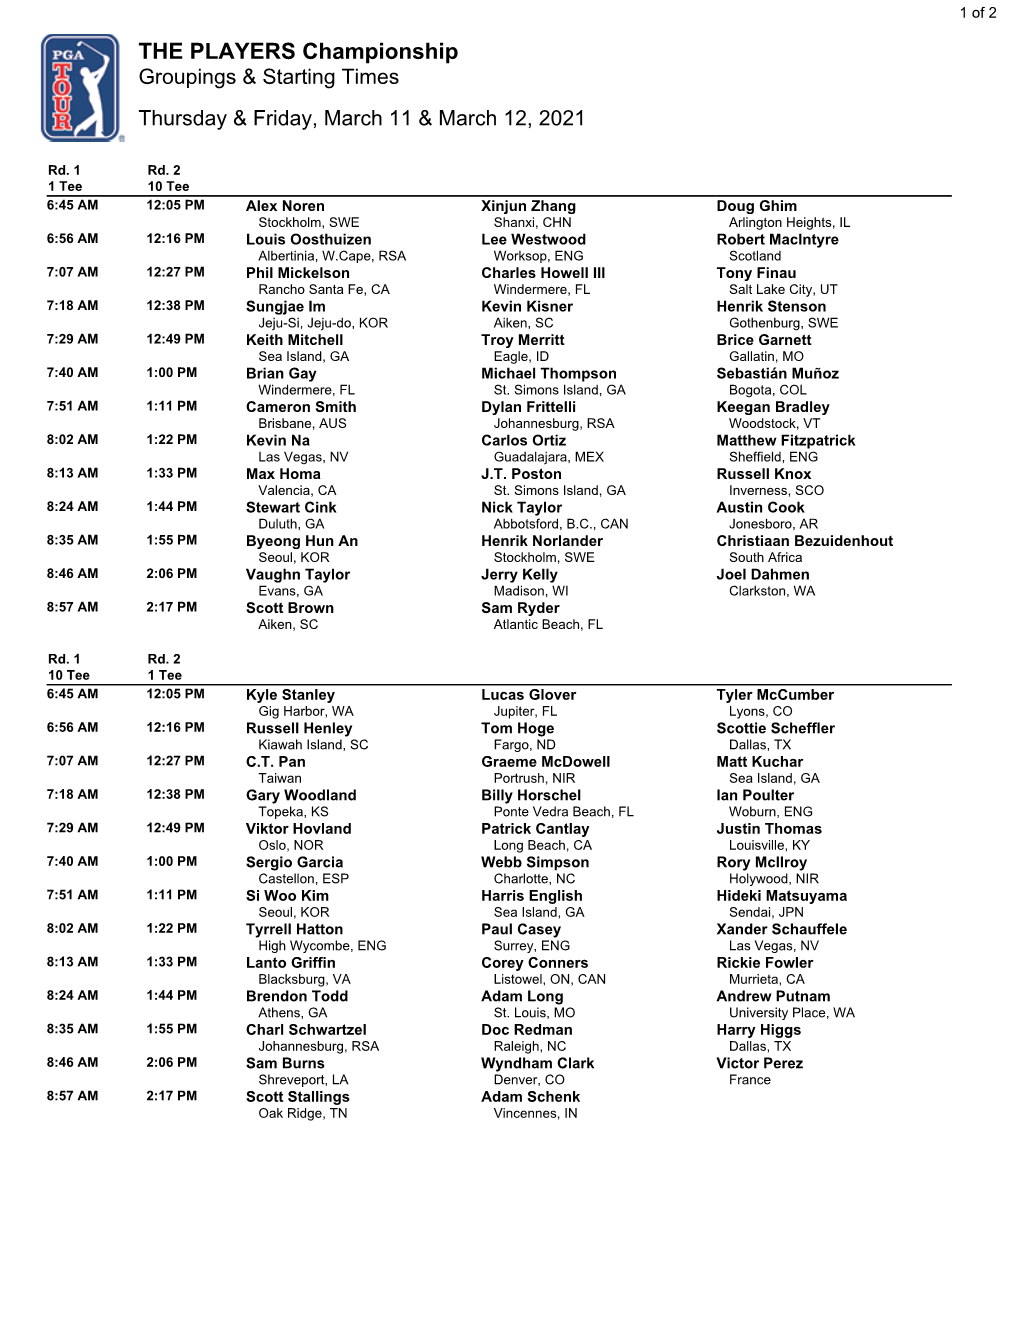 THE PLAYERS Championship Groupings & Starting Times Thursday & Friday, March 11 & March 12, 2021